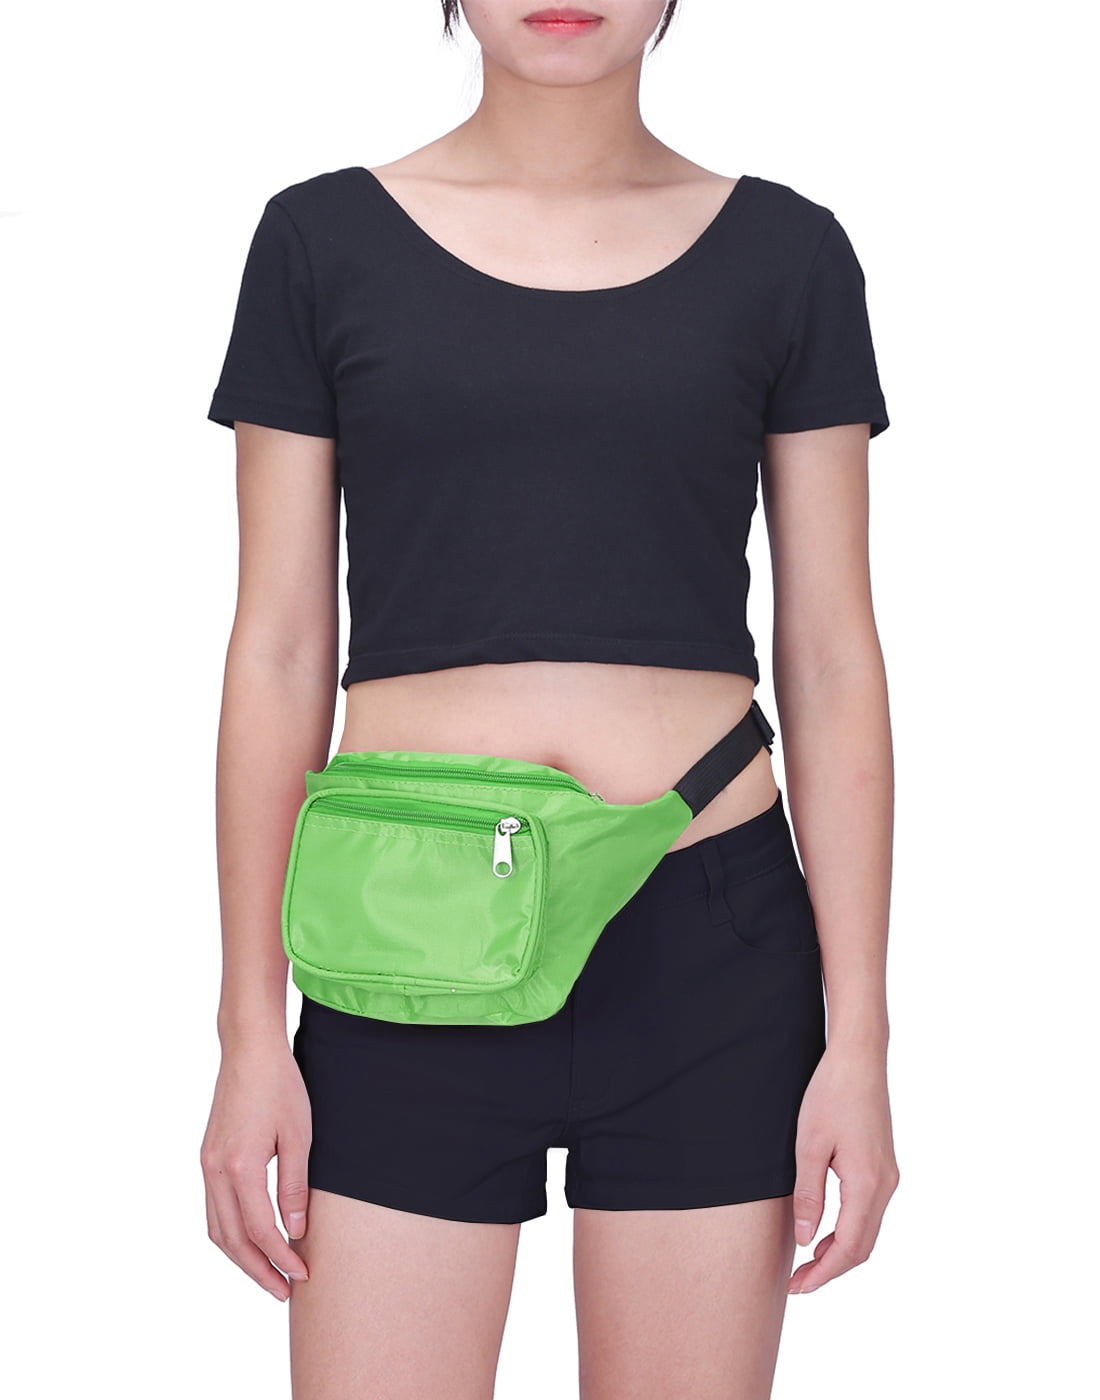 HDE Fanny Pack [80's Style] Waist Pack Outdoor Travel Crossbody Hip Bag